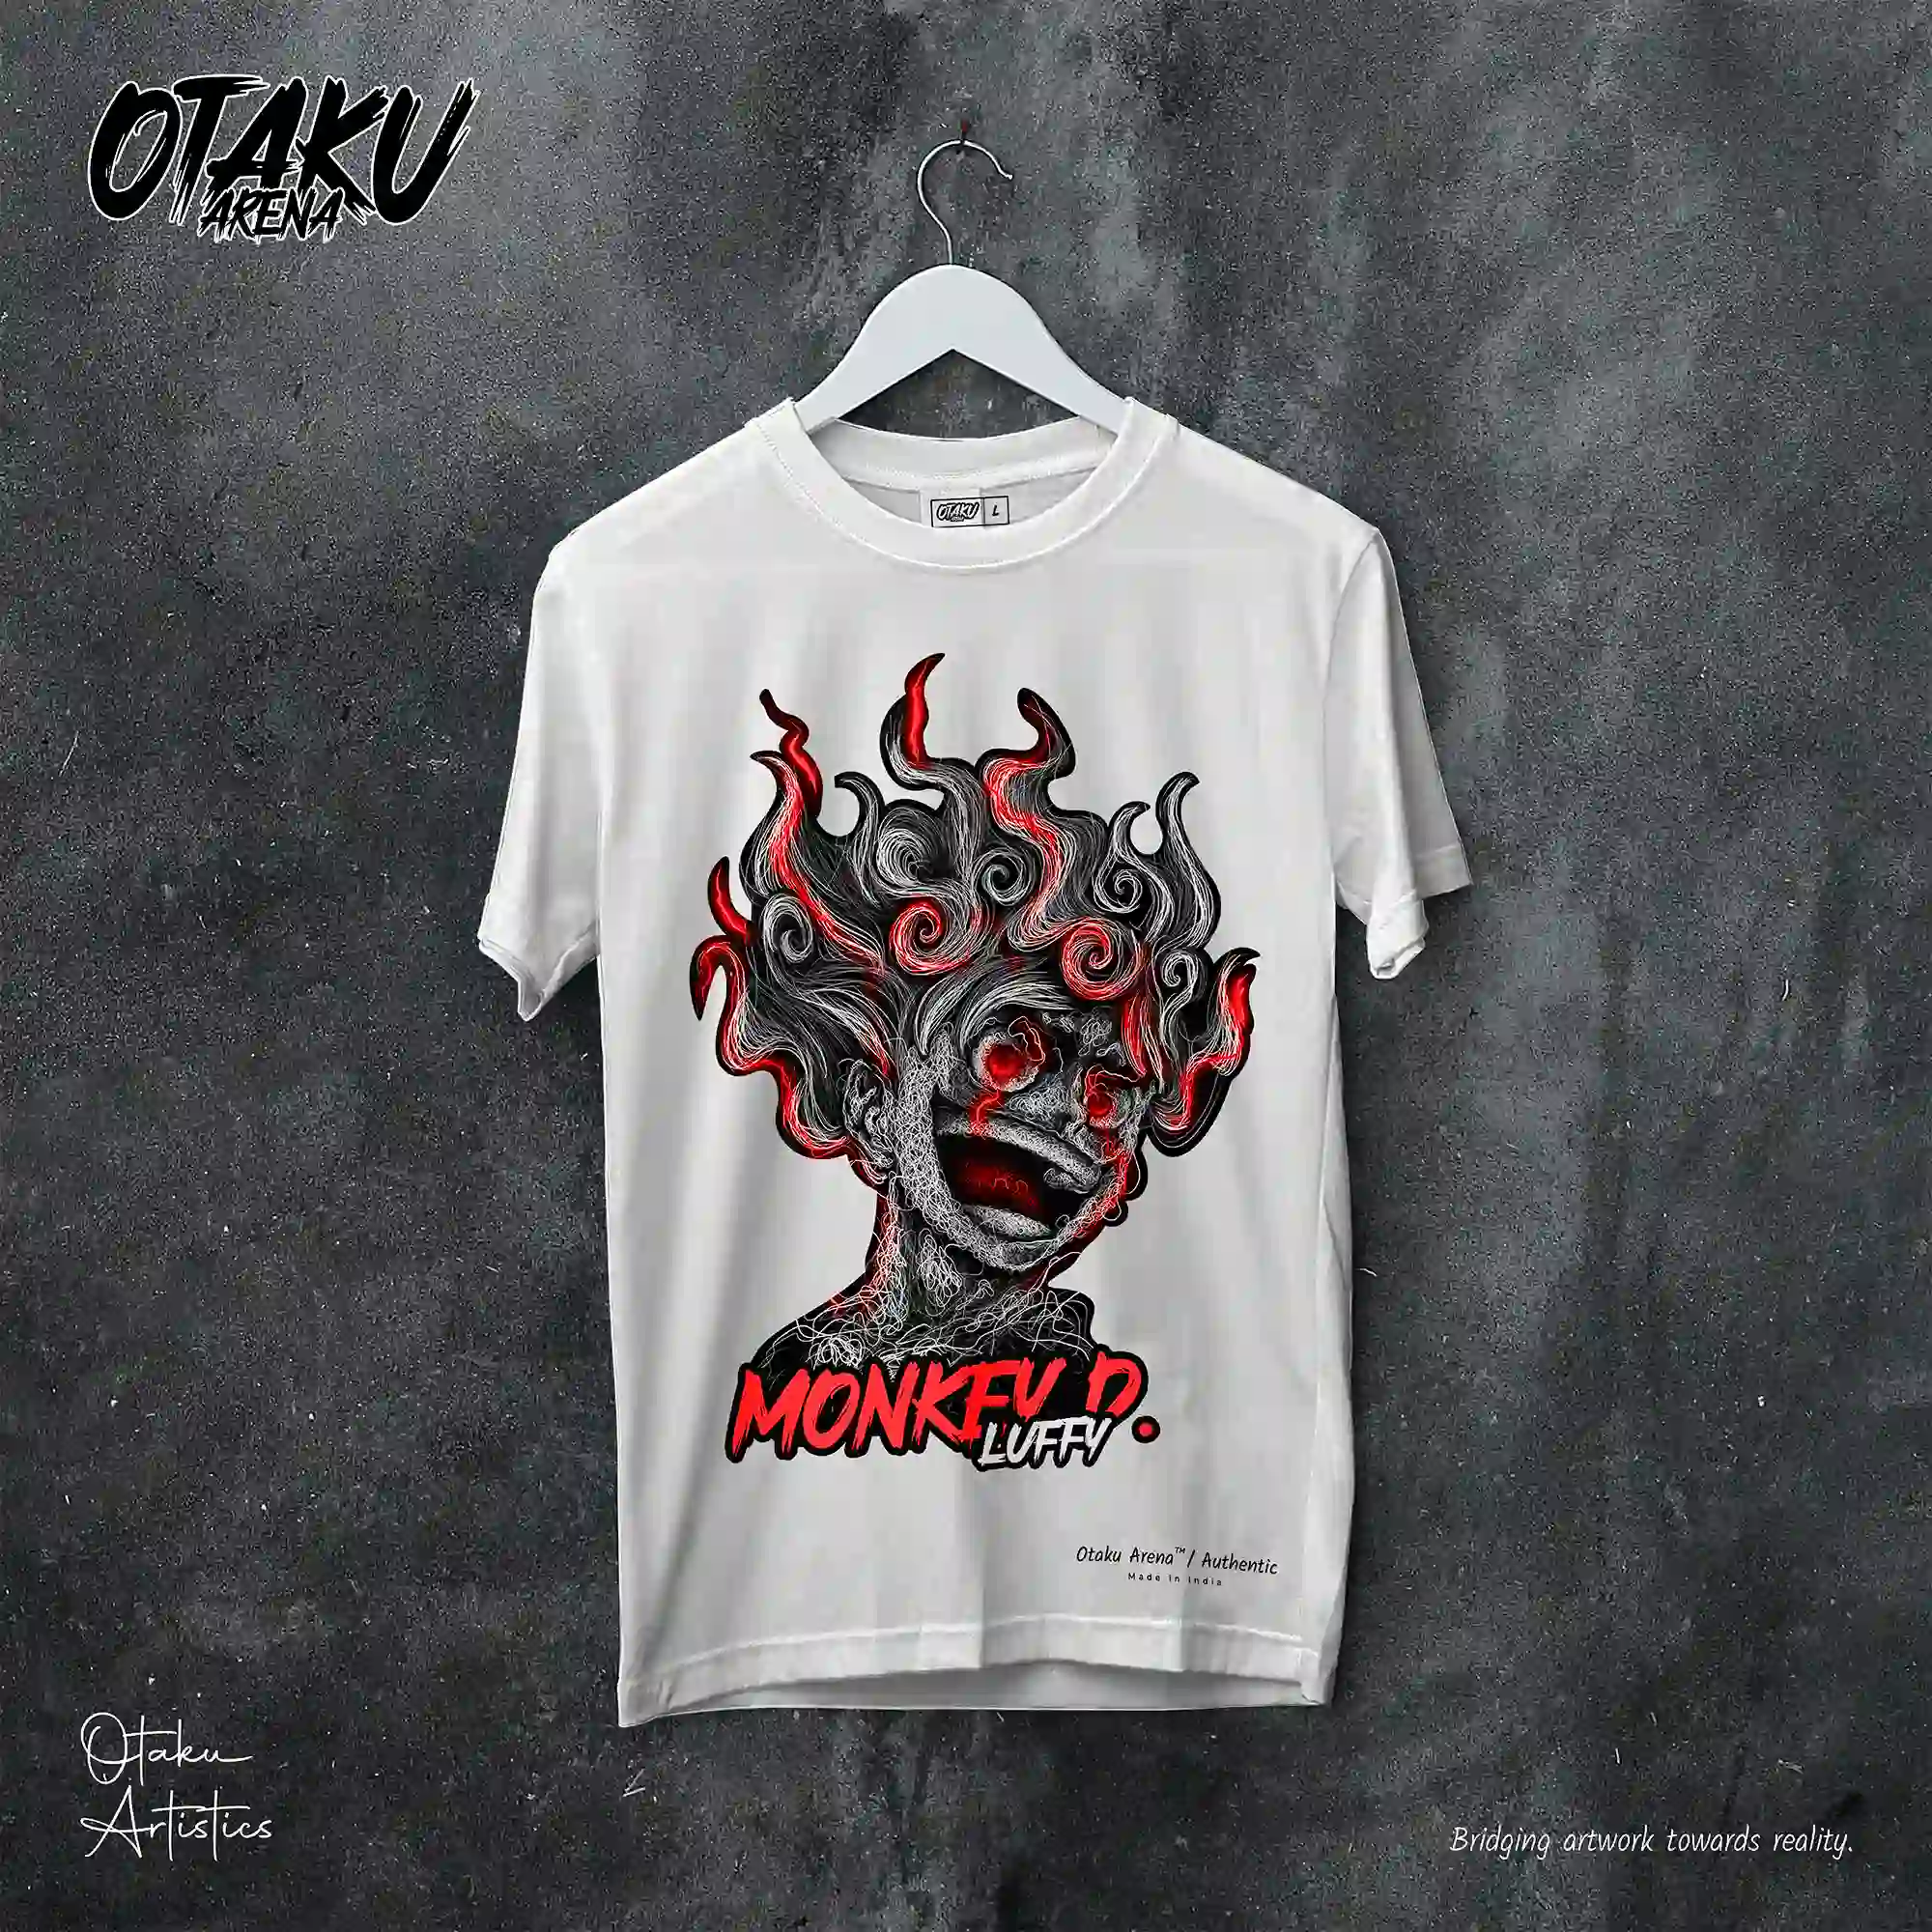 Only 439.60 usd for Monkey D. Luffy / Gear 5 Oversized T-Shirt Online at  the Shop